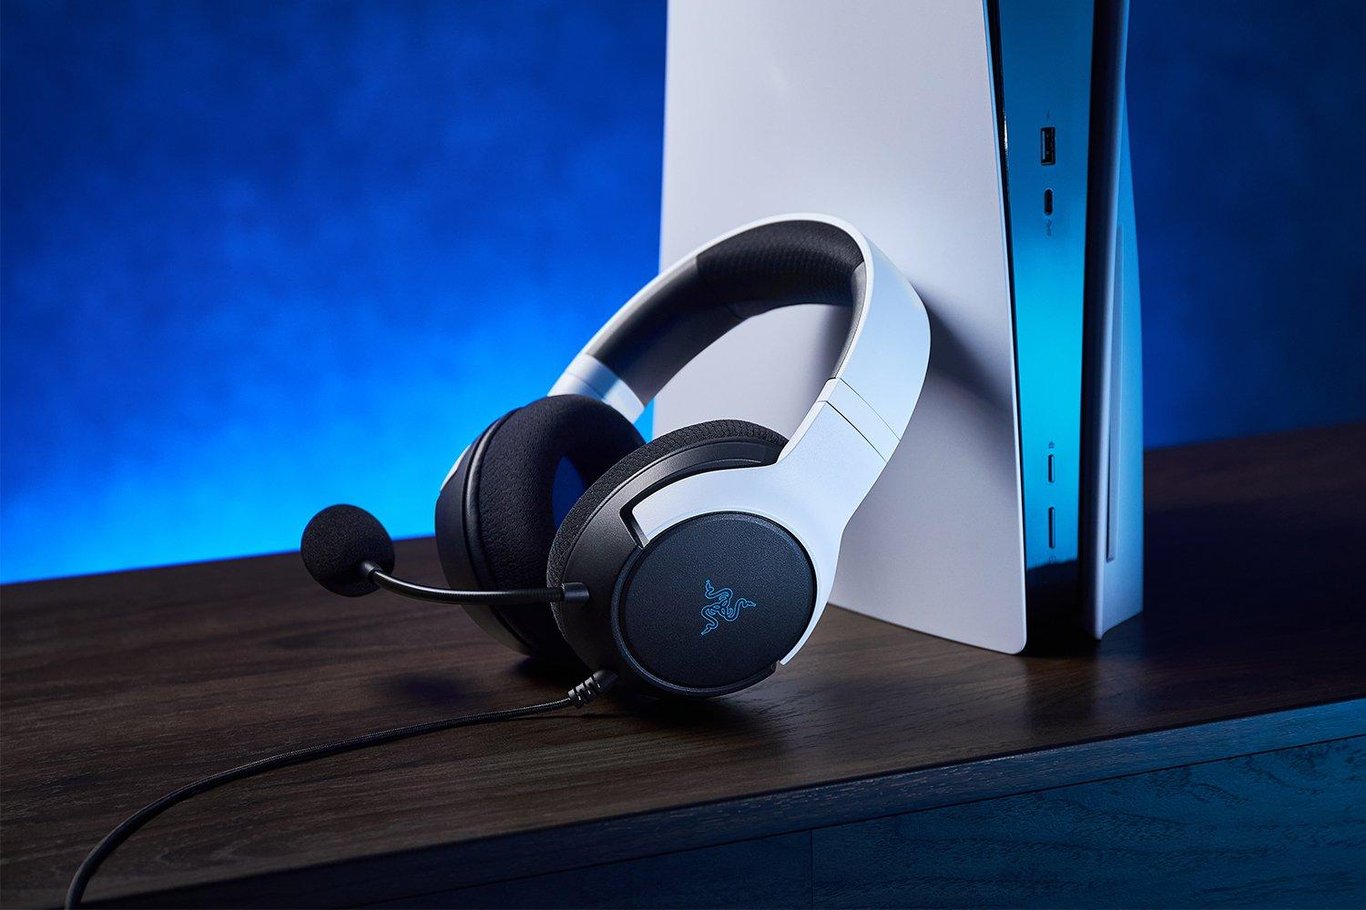 Razer Kaira X for Playstation - Wired Gaming Headset for PS5 有線遊戲耳機